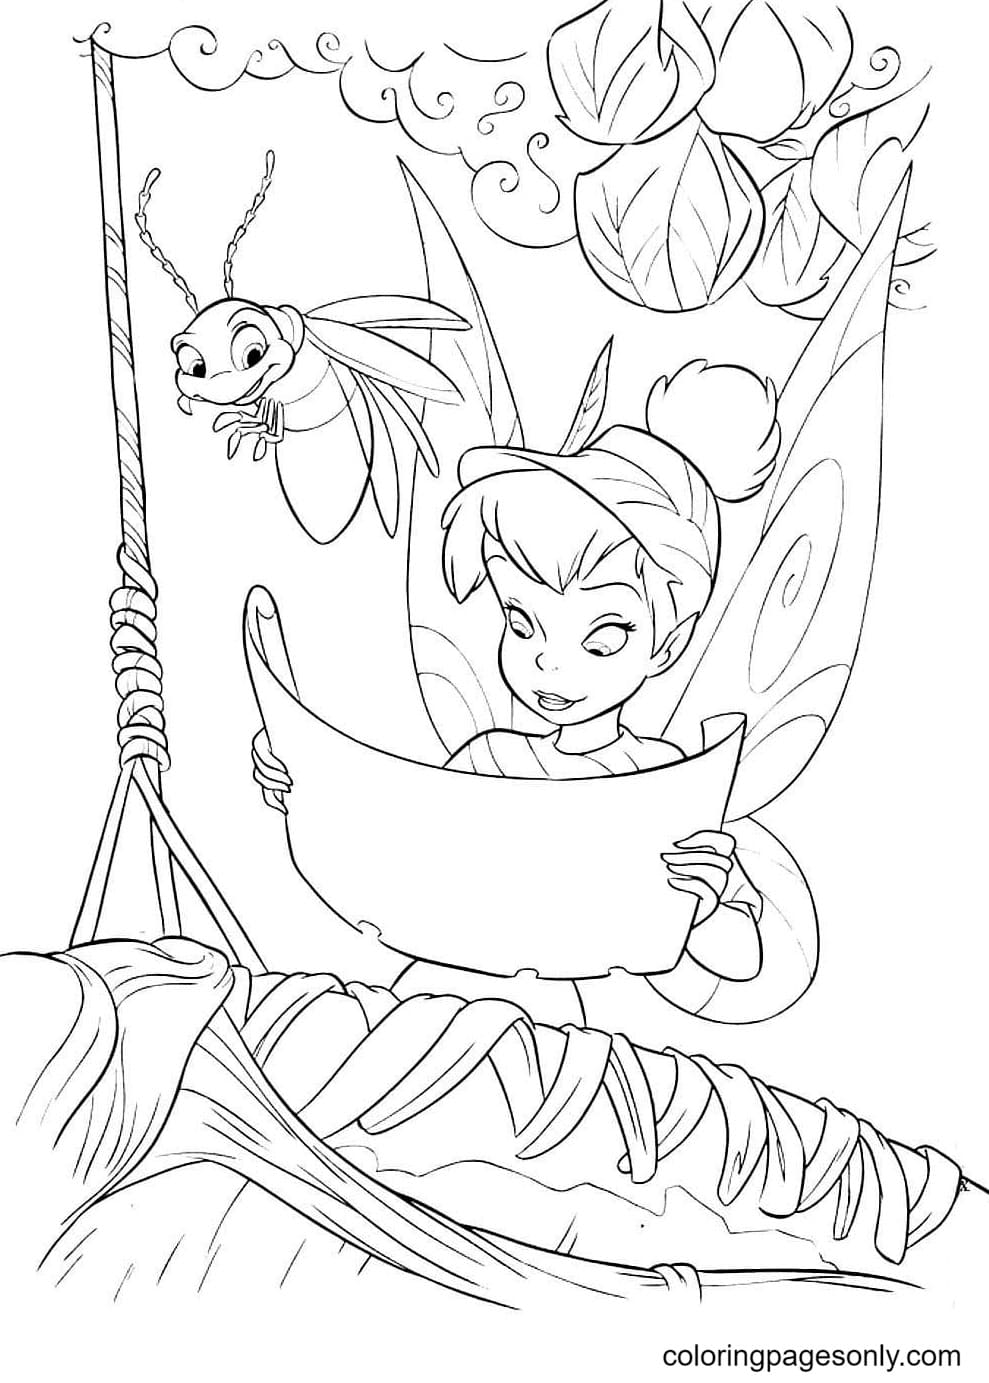 Firefly Free Image Coloring Page